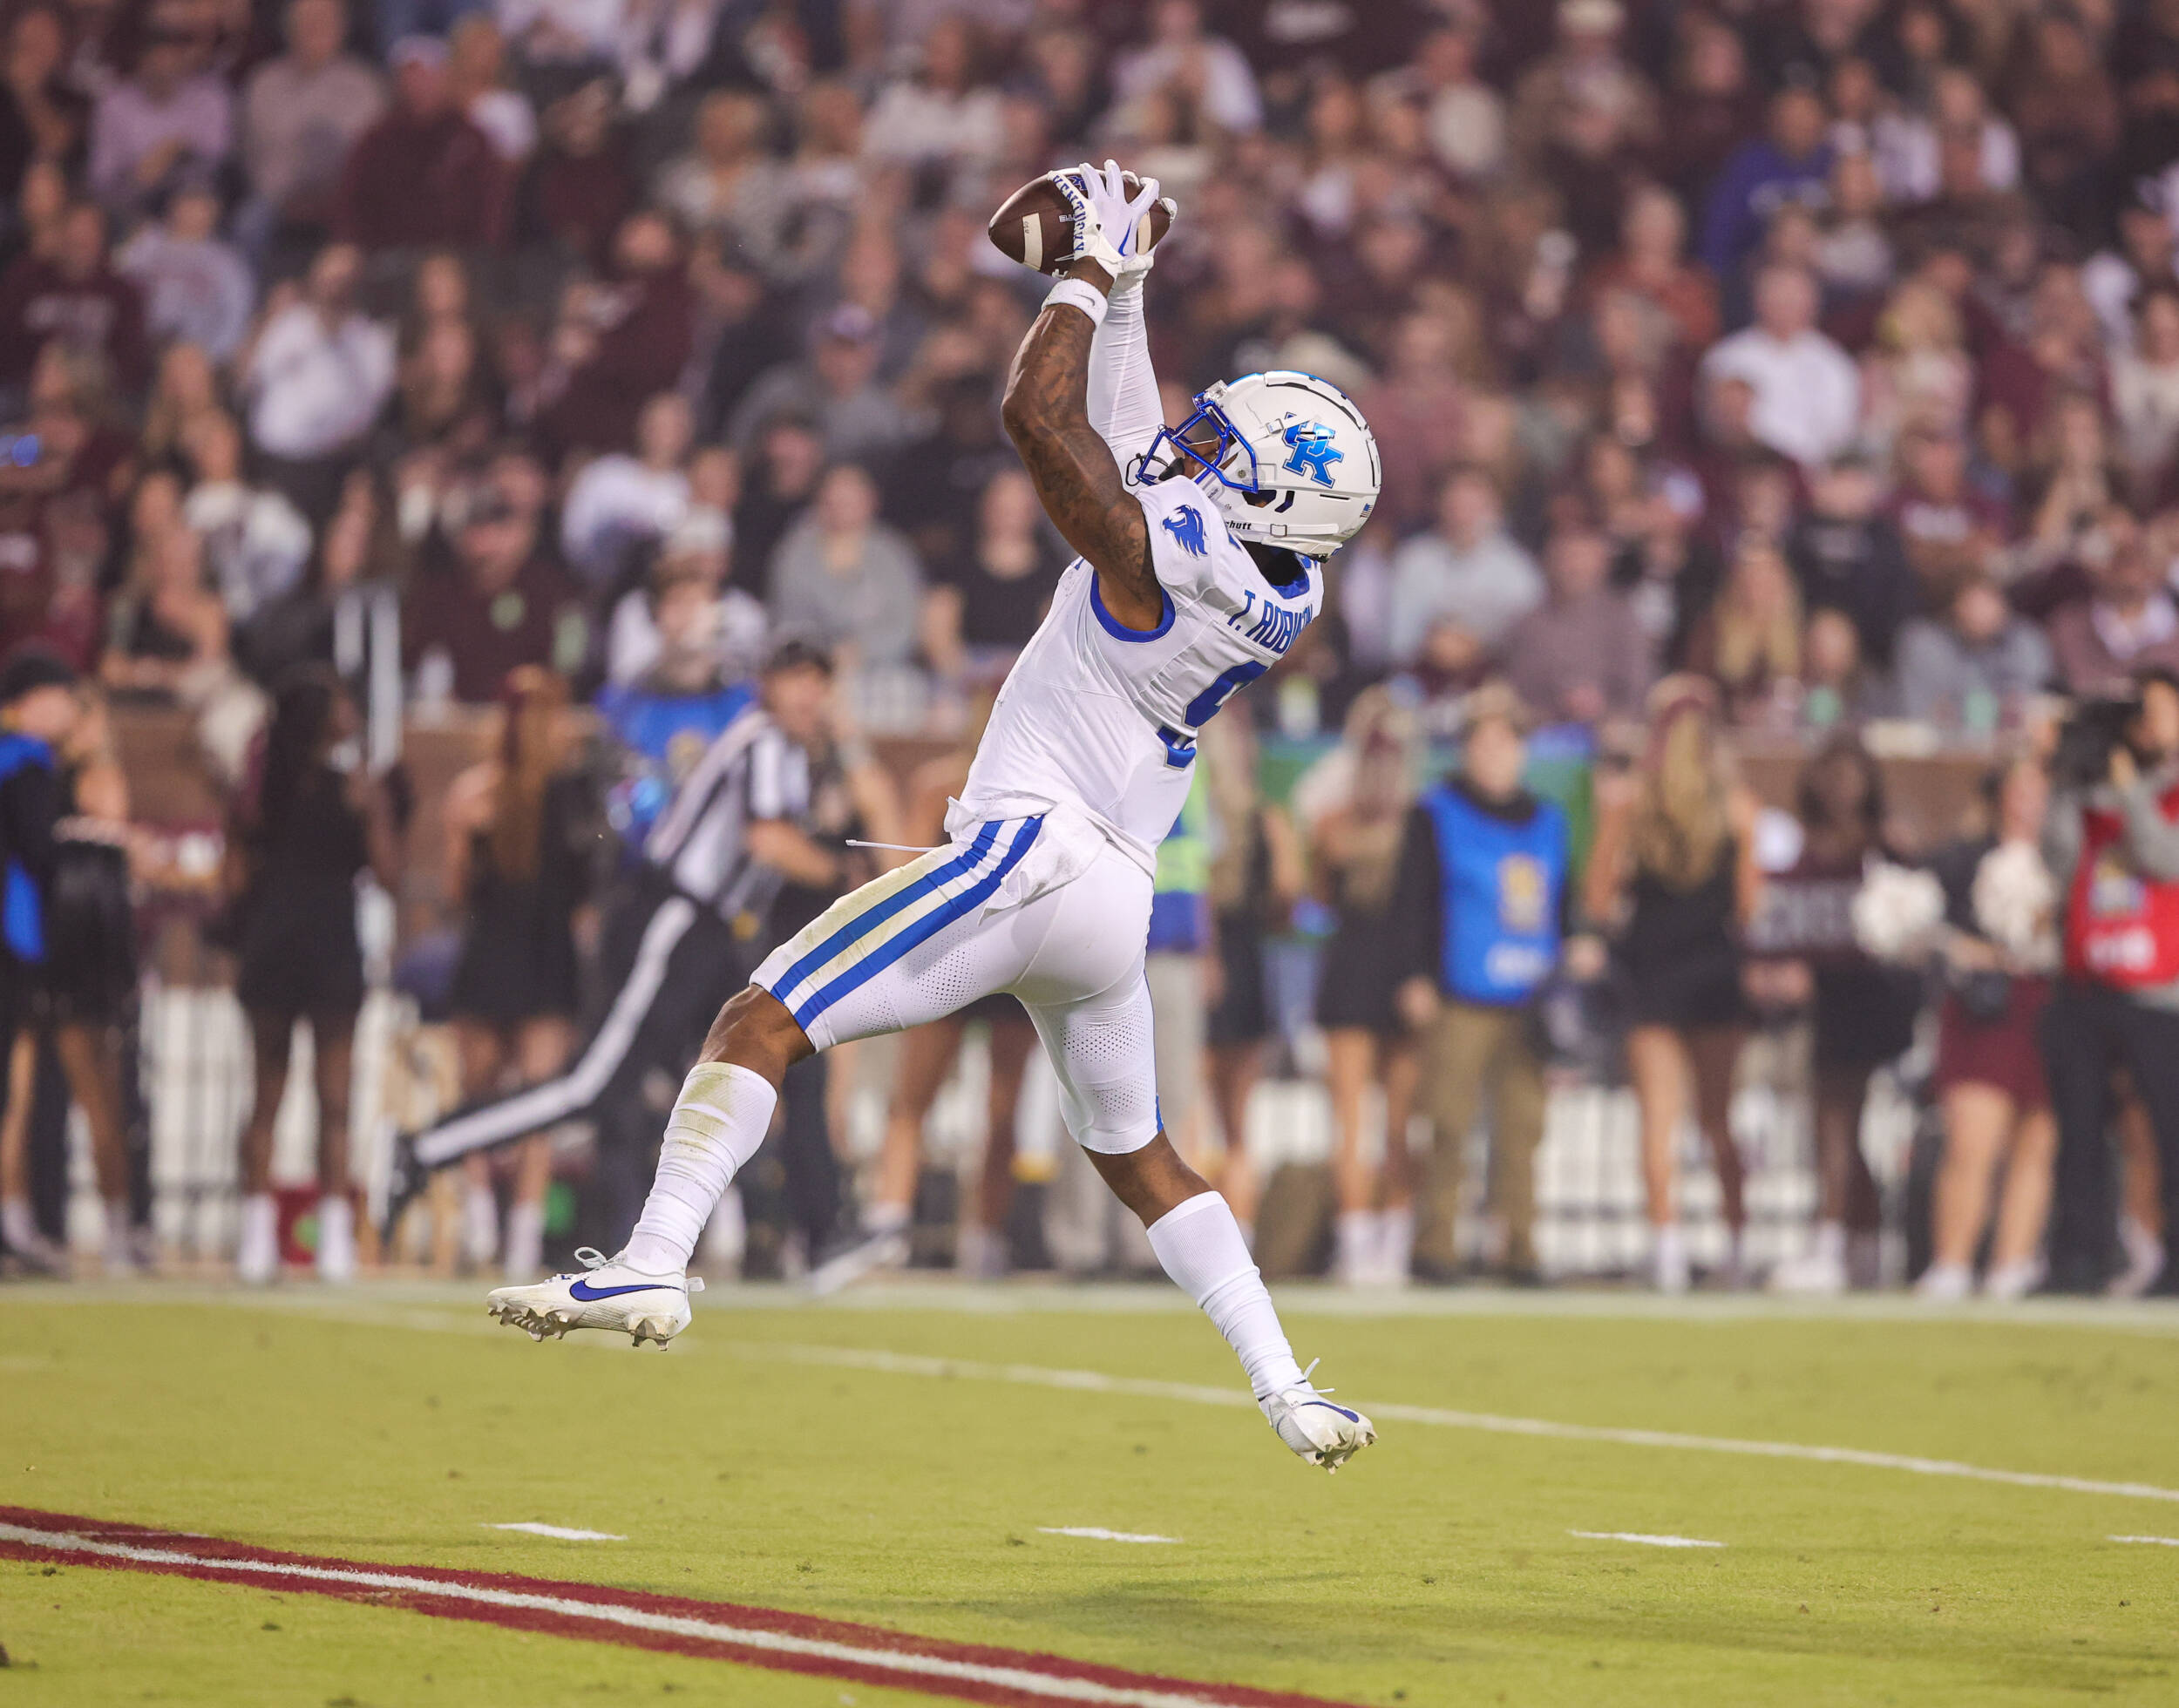 Highlights: Kentucky 24, Mississippi State 3